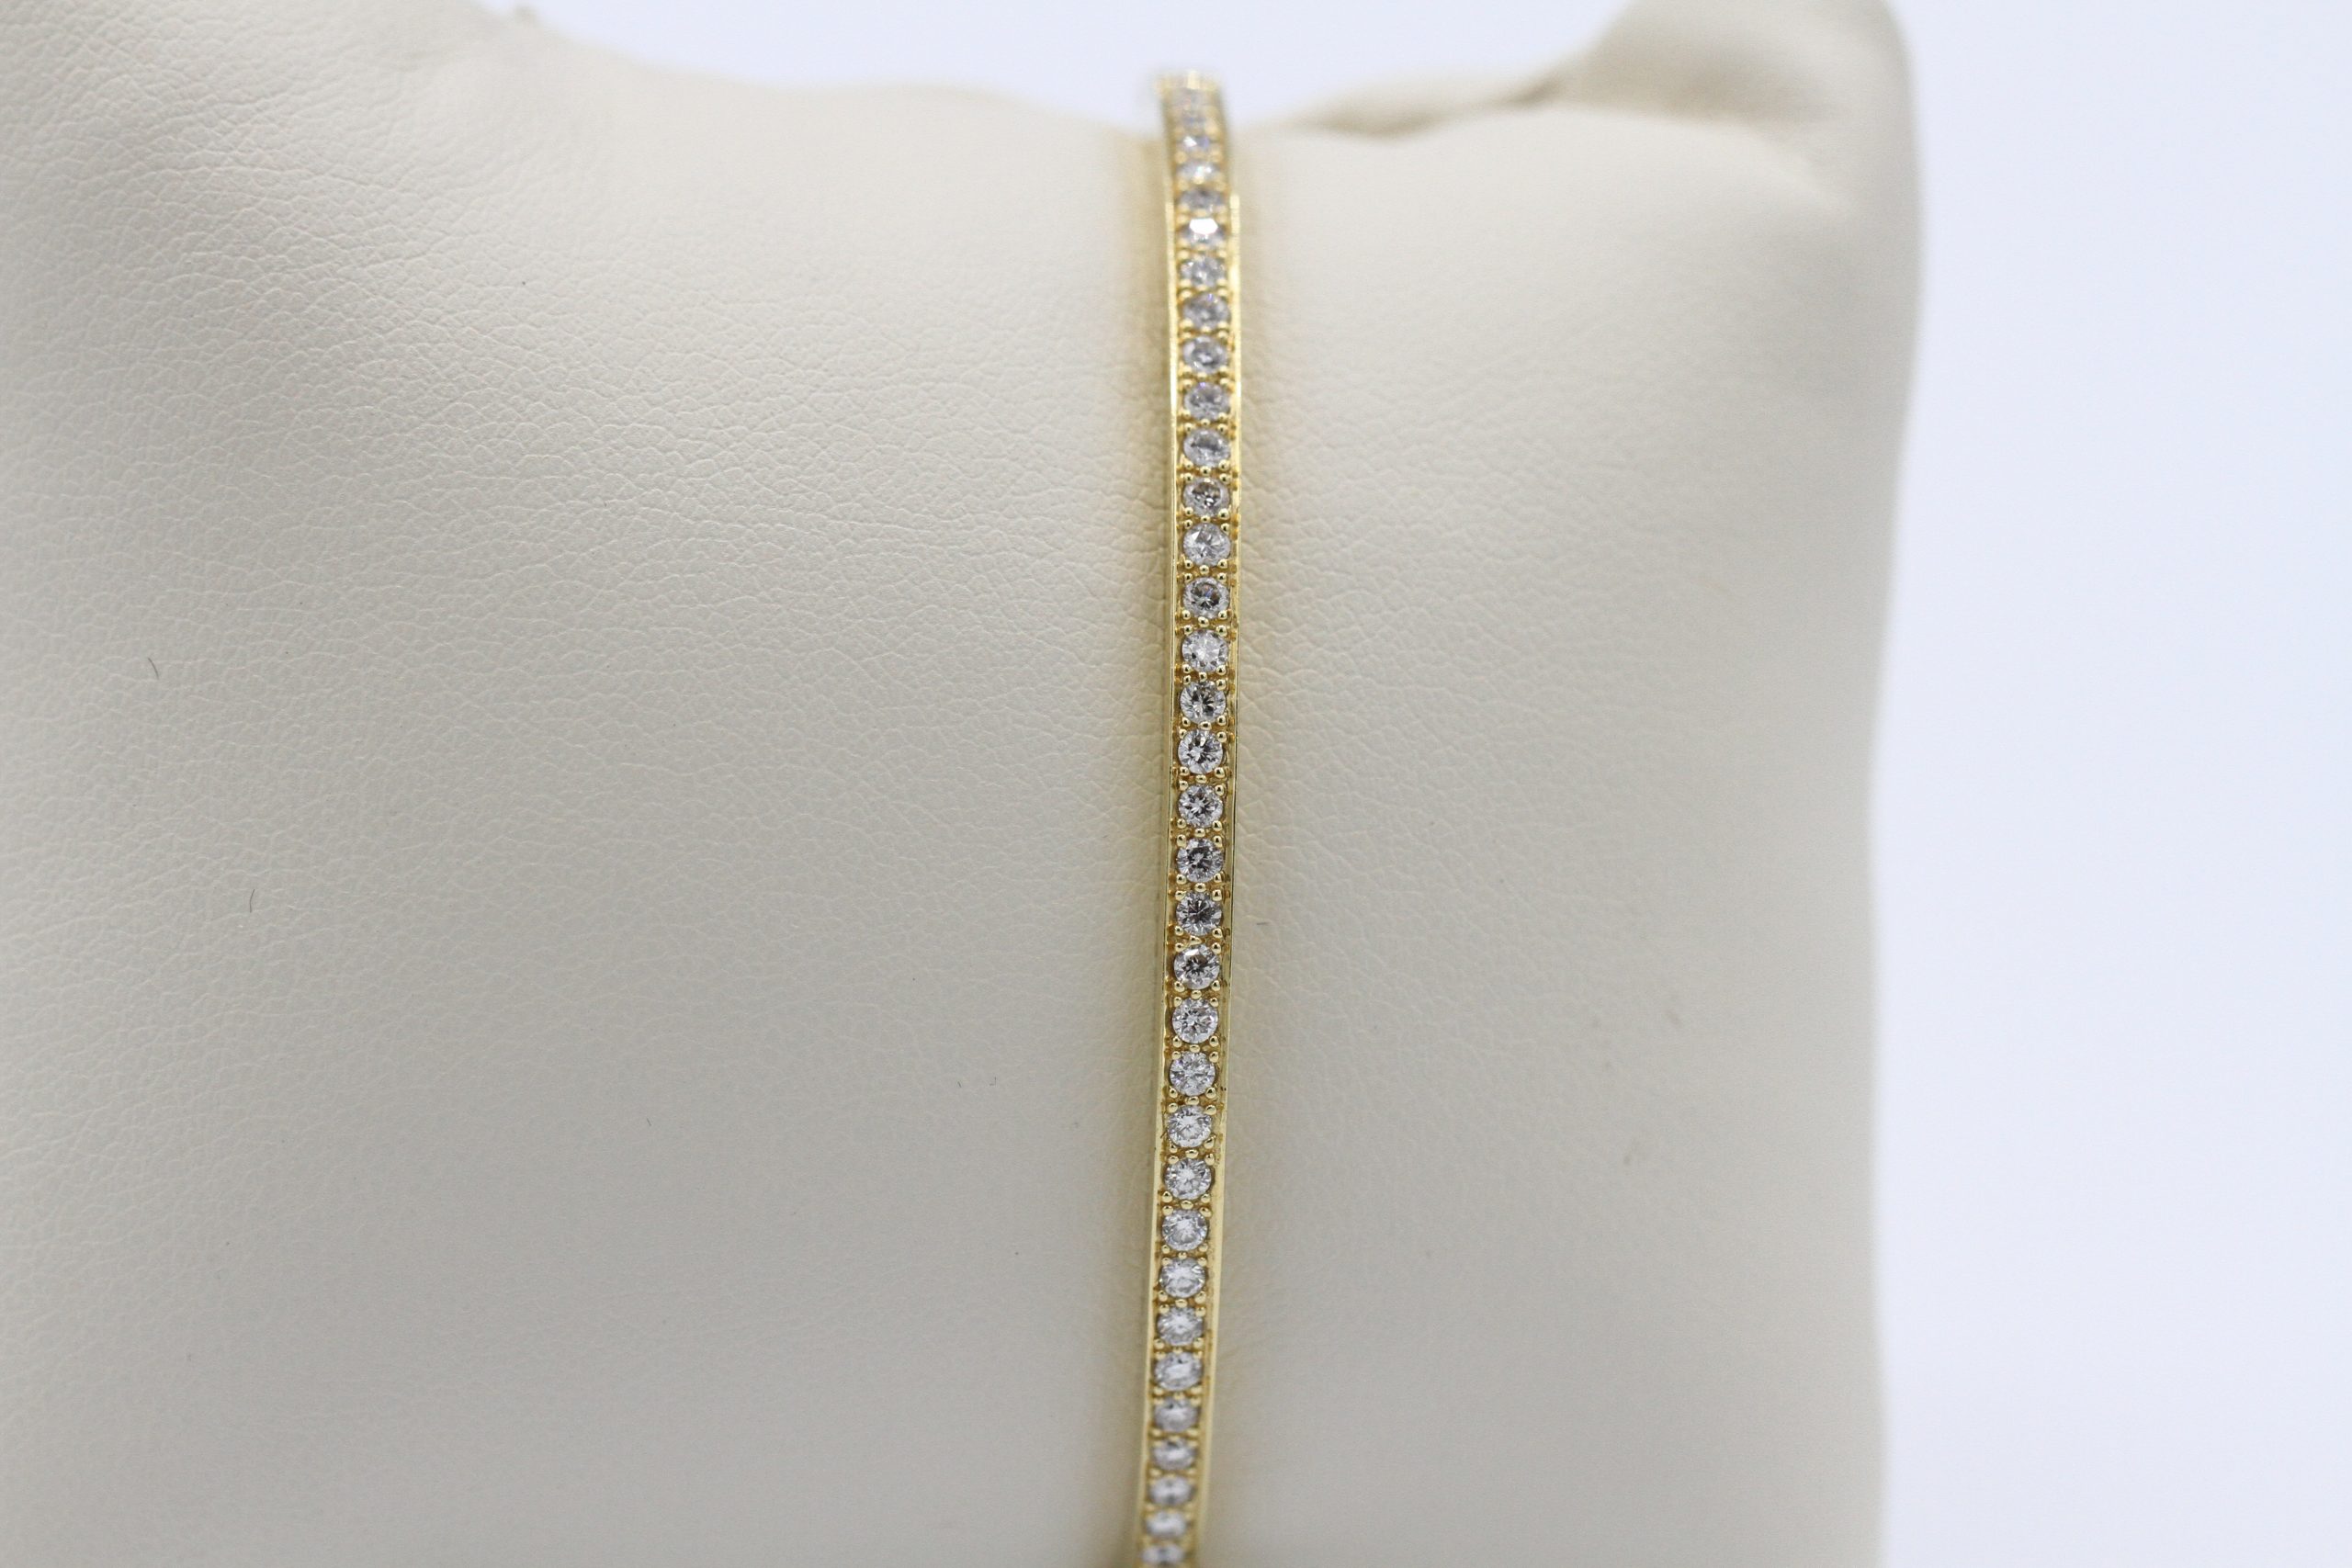 A small, gold bracelet with diamond encircling it.